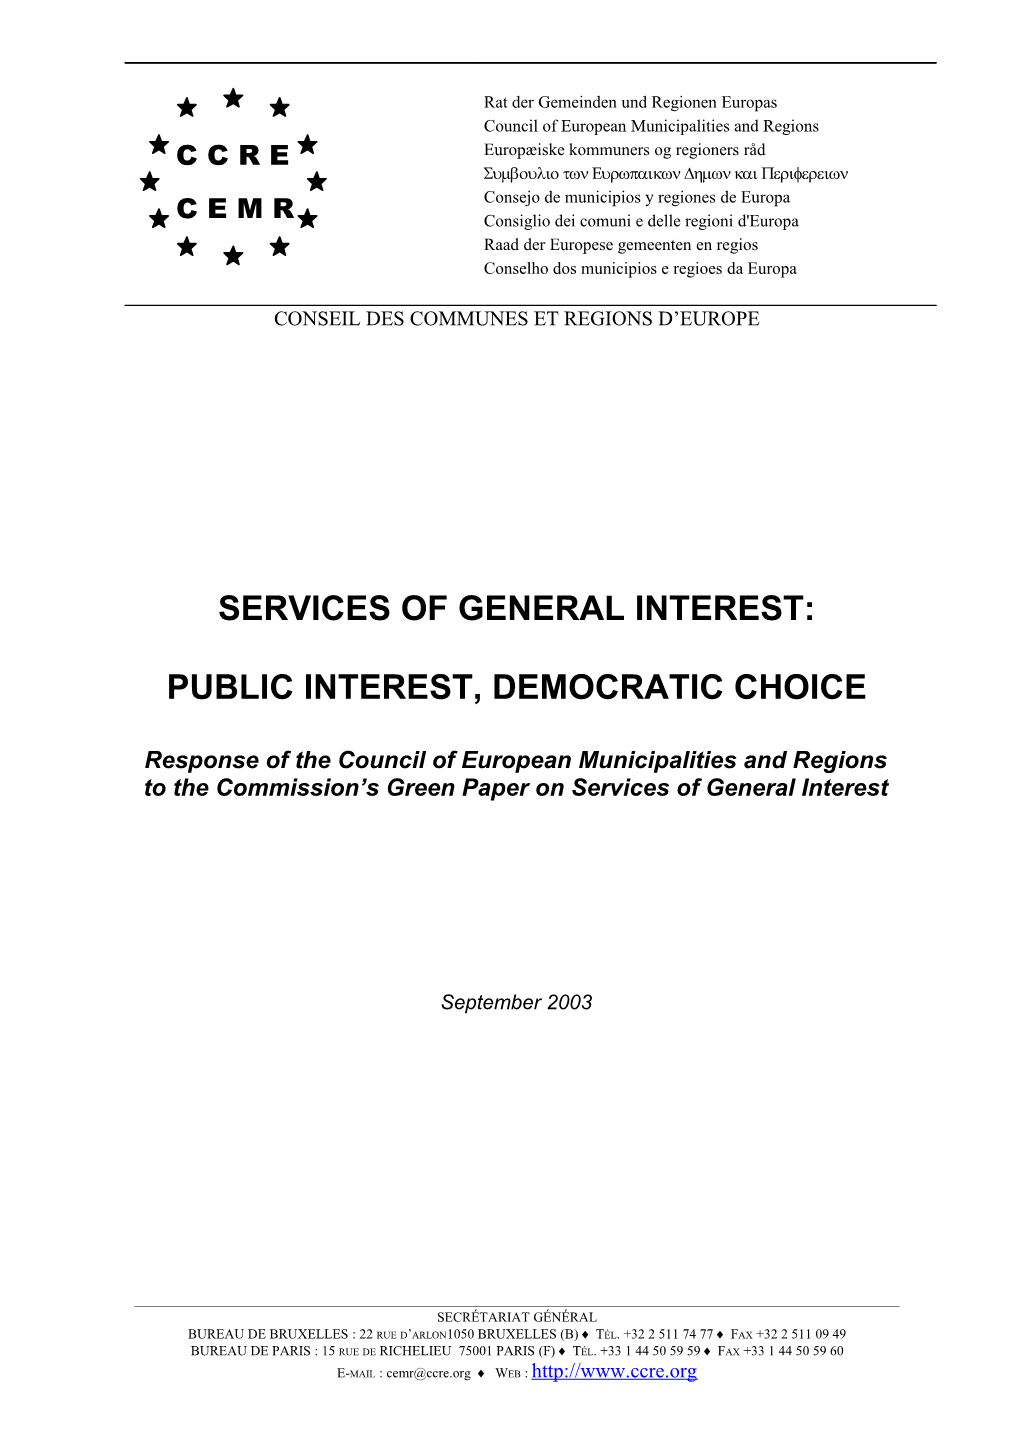 Services of General Interest